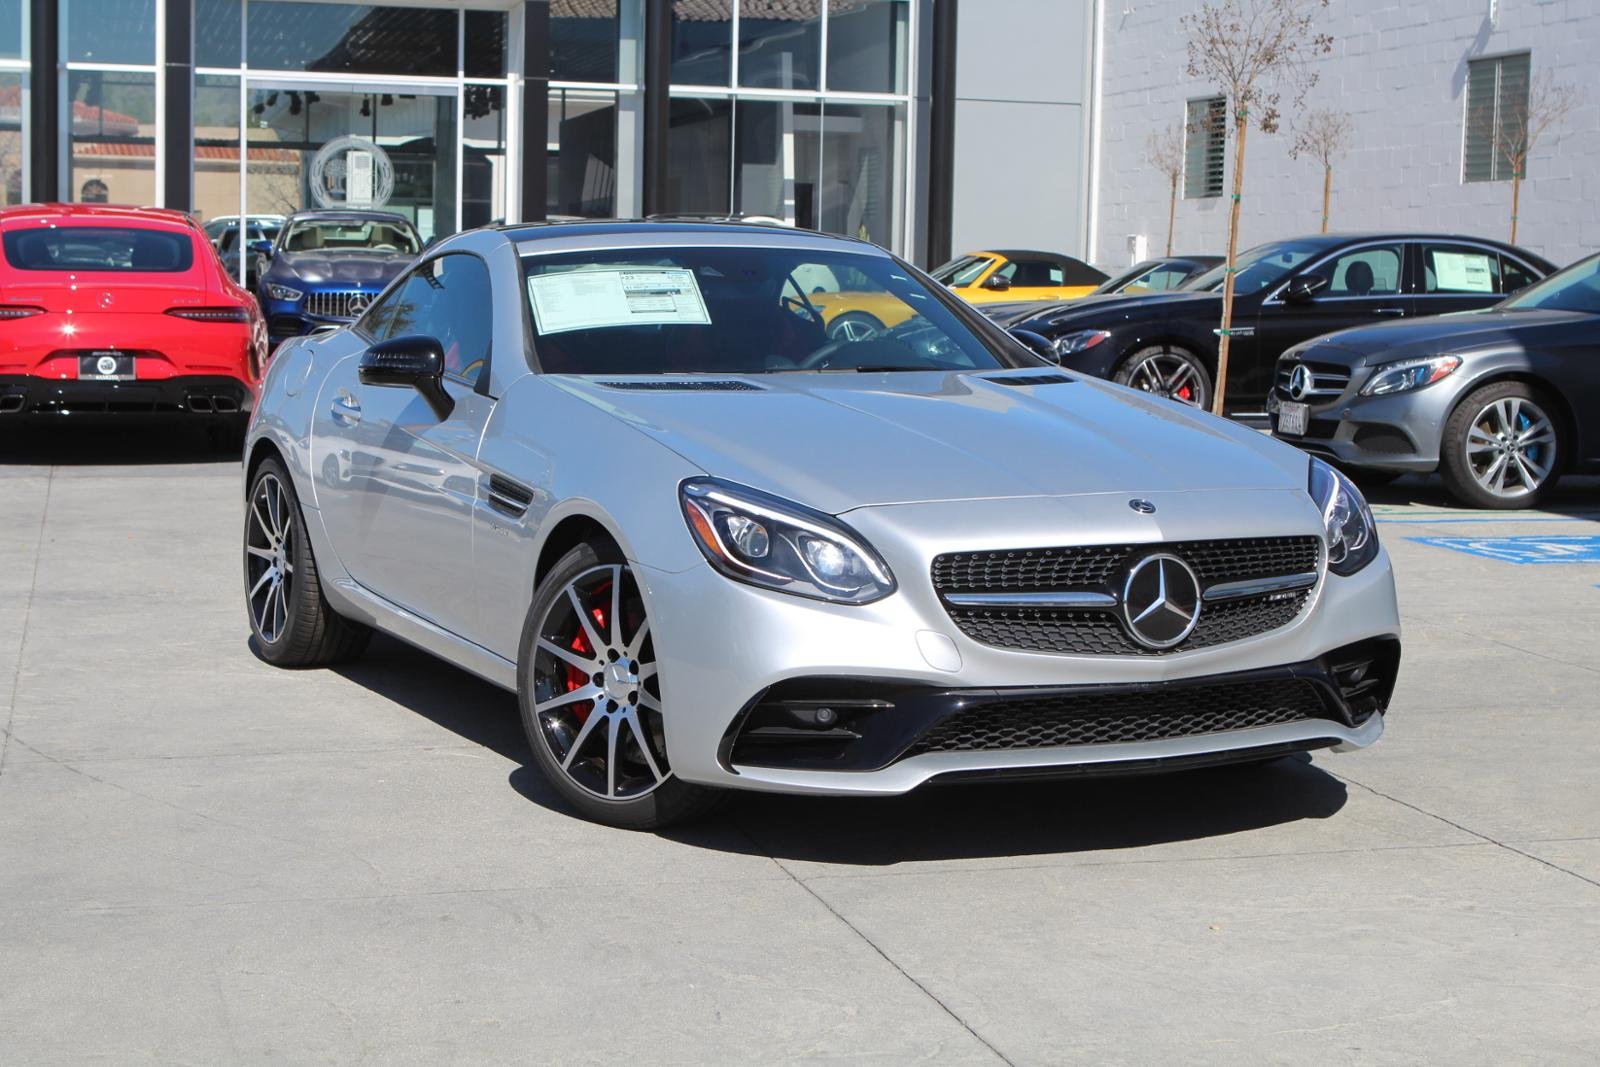 New 2019 Mercedes Benz Slc Amg Slc 43 Roadster In Thousand Oaks